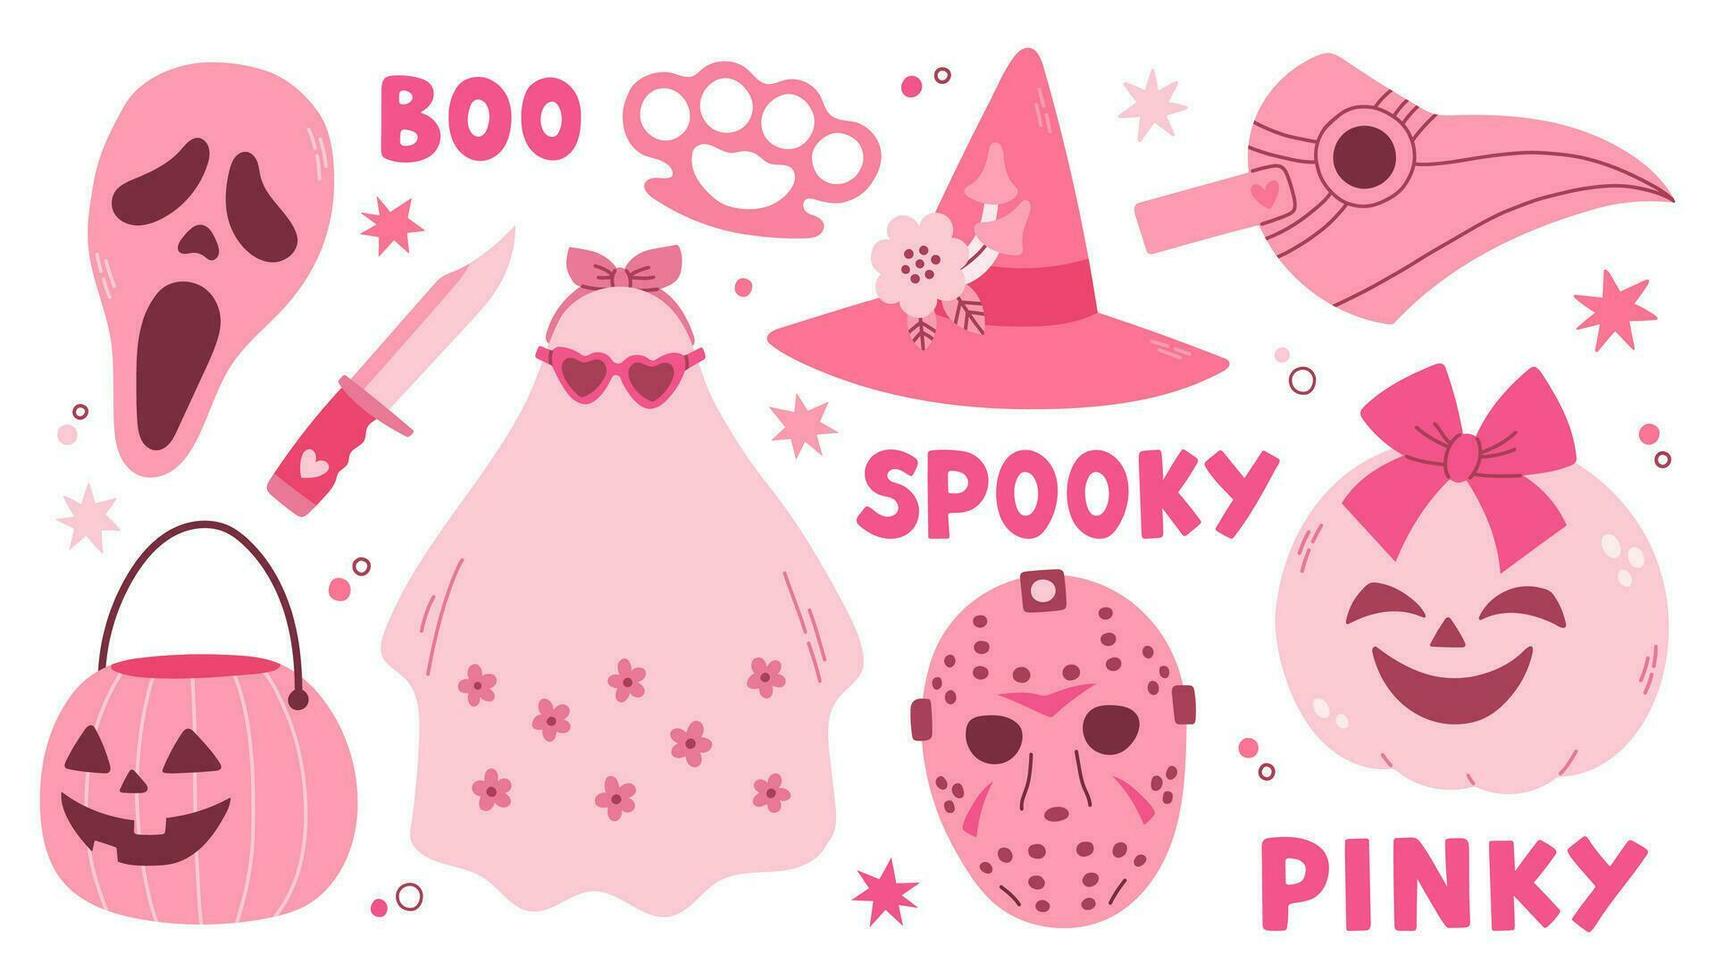 Pink Halloween vector set with ghost, skull, masks, pumpkin, stars. Pink print in flat style. Halloween lettering quote. Vector illustration